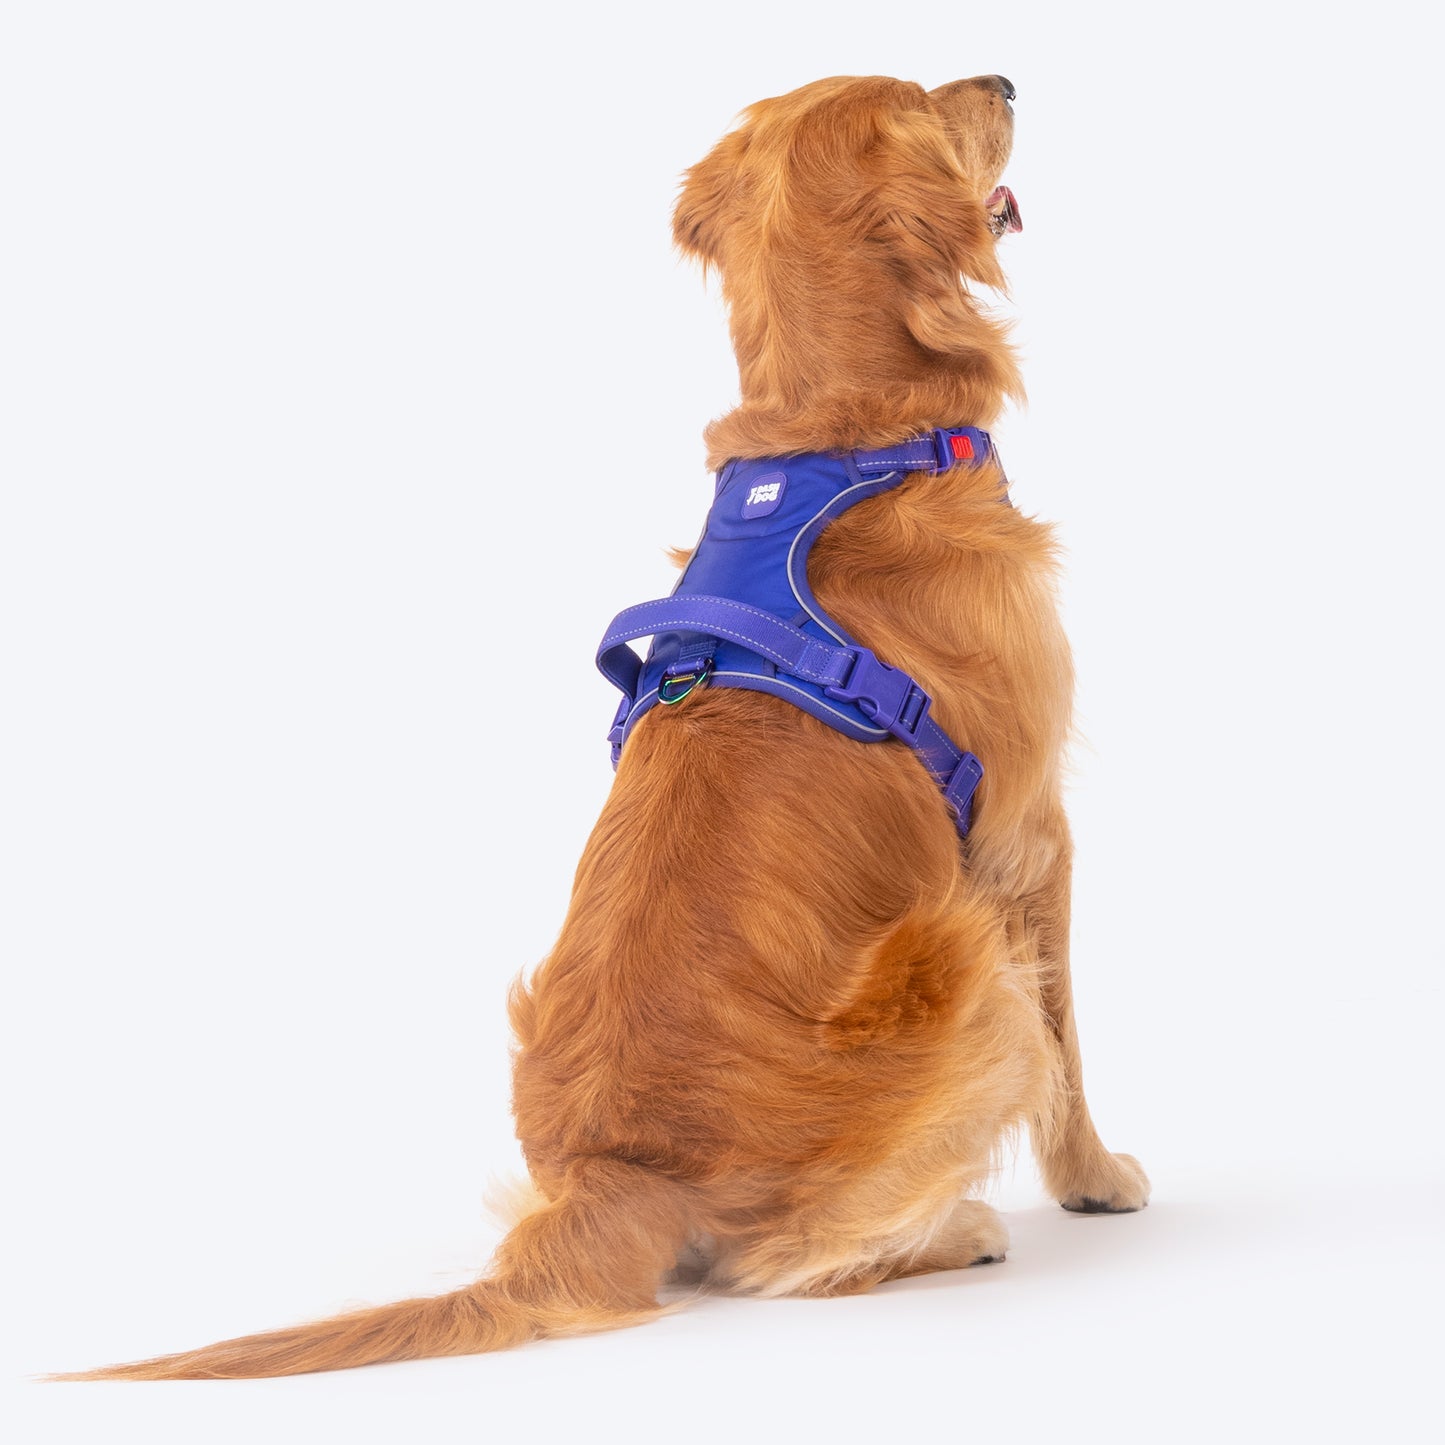 Dash Dog Zoom Walk Along Harness - Violet & Red – Heads Up For Tails